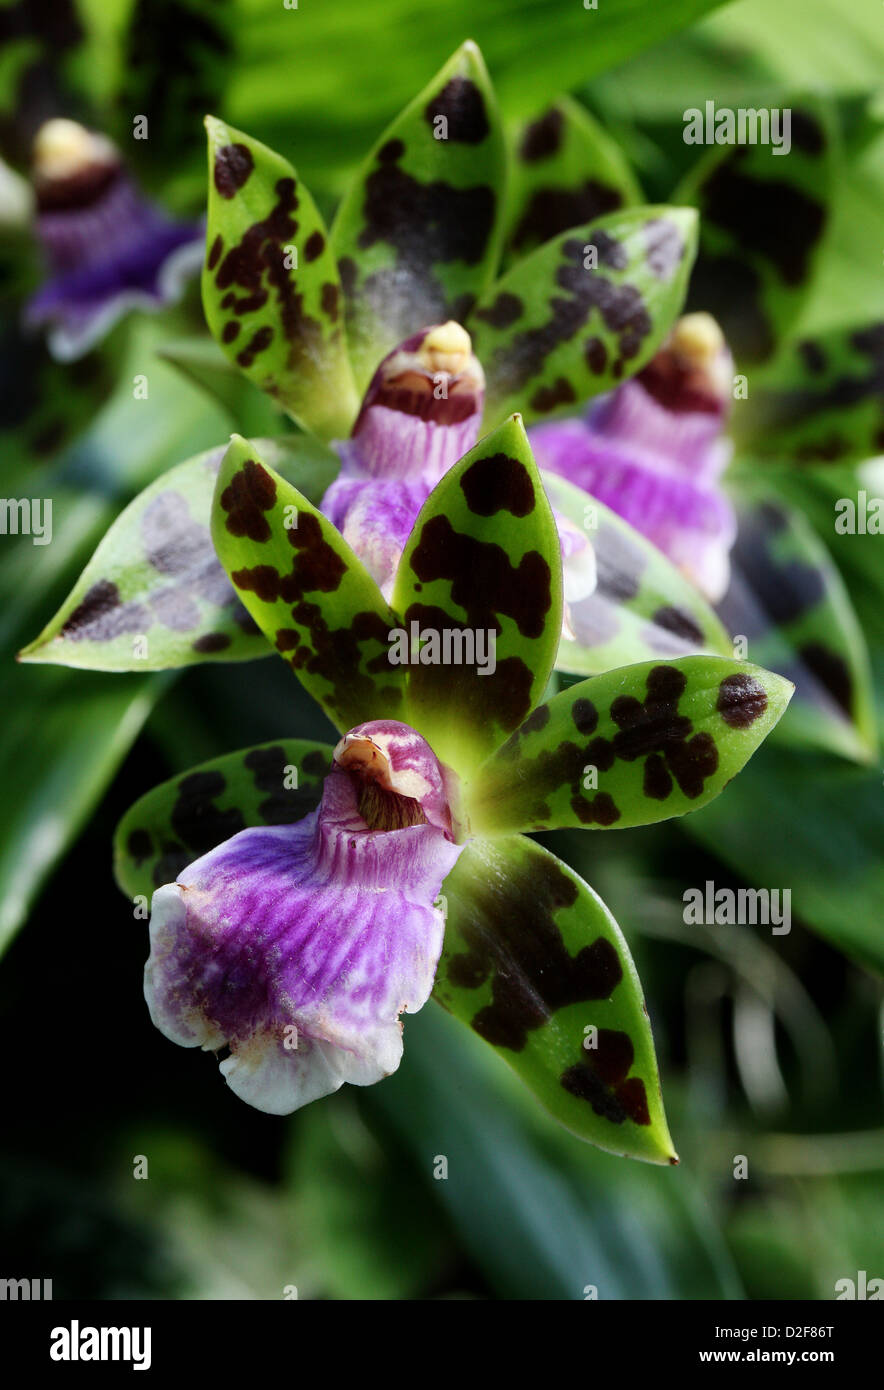 Orchid, Zygopetalum clayii, Orchidaceae. Brazil, South America. Stock Photo